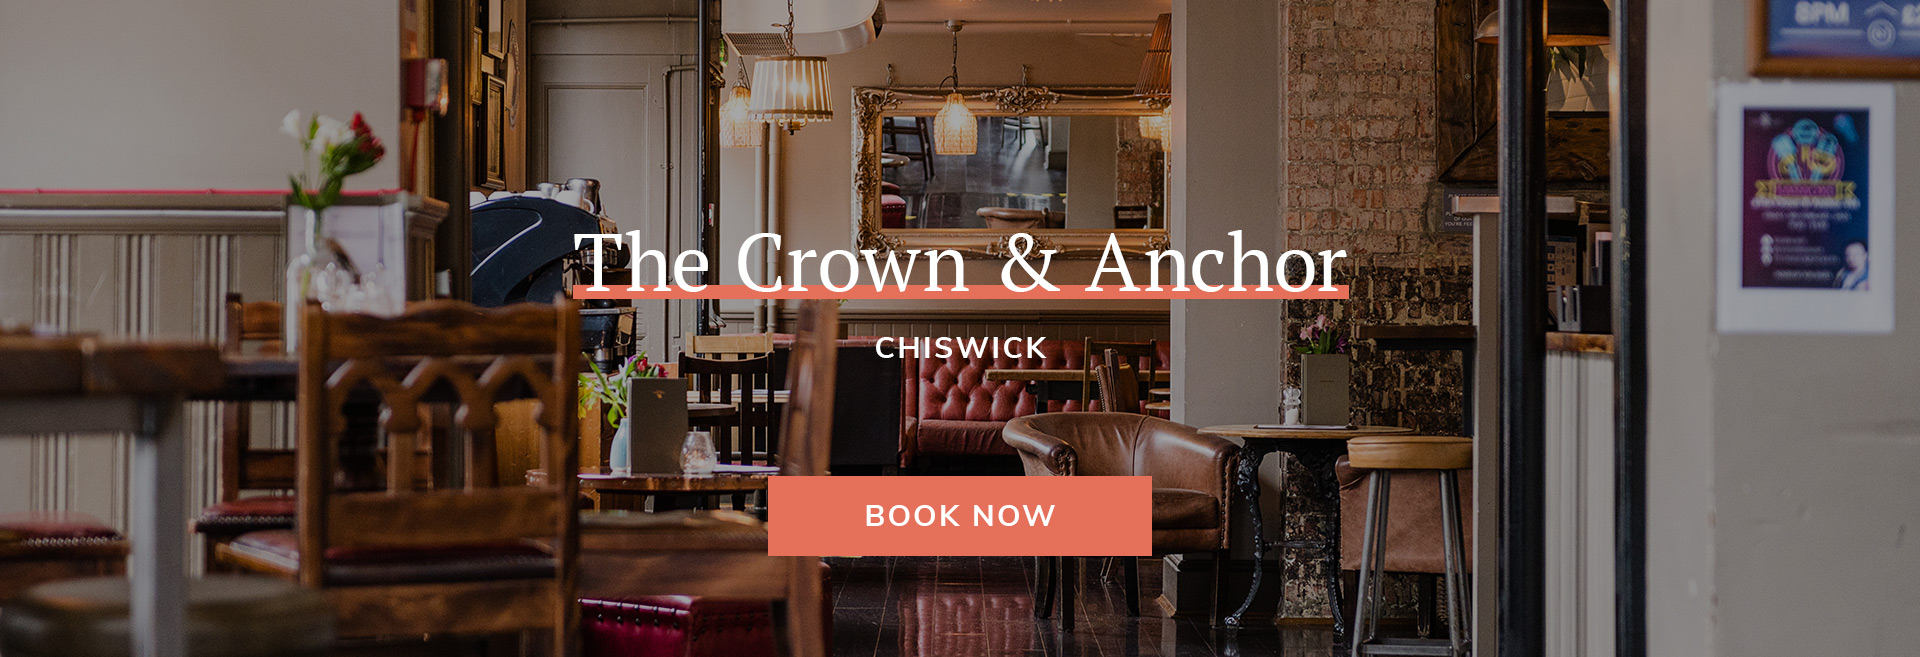 The Crown and Anchor Chiswick Banner 3